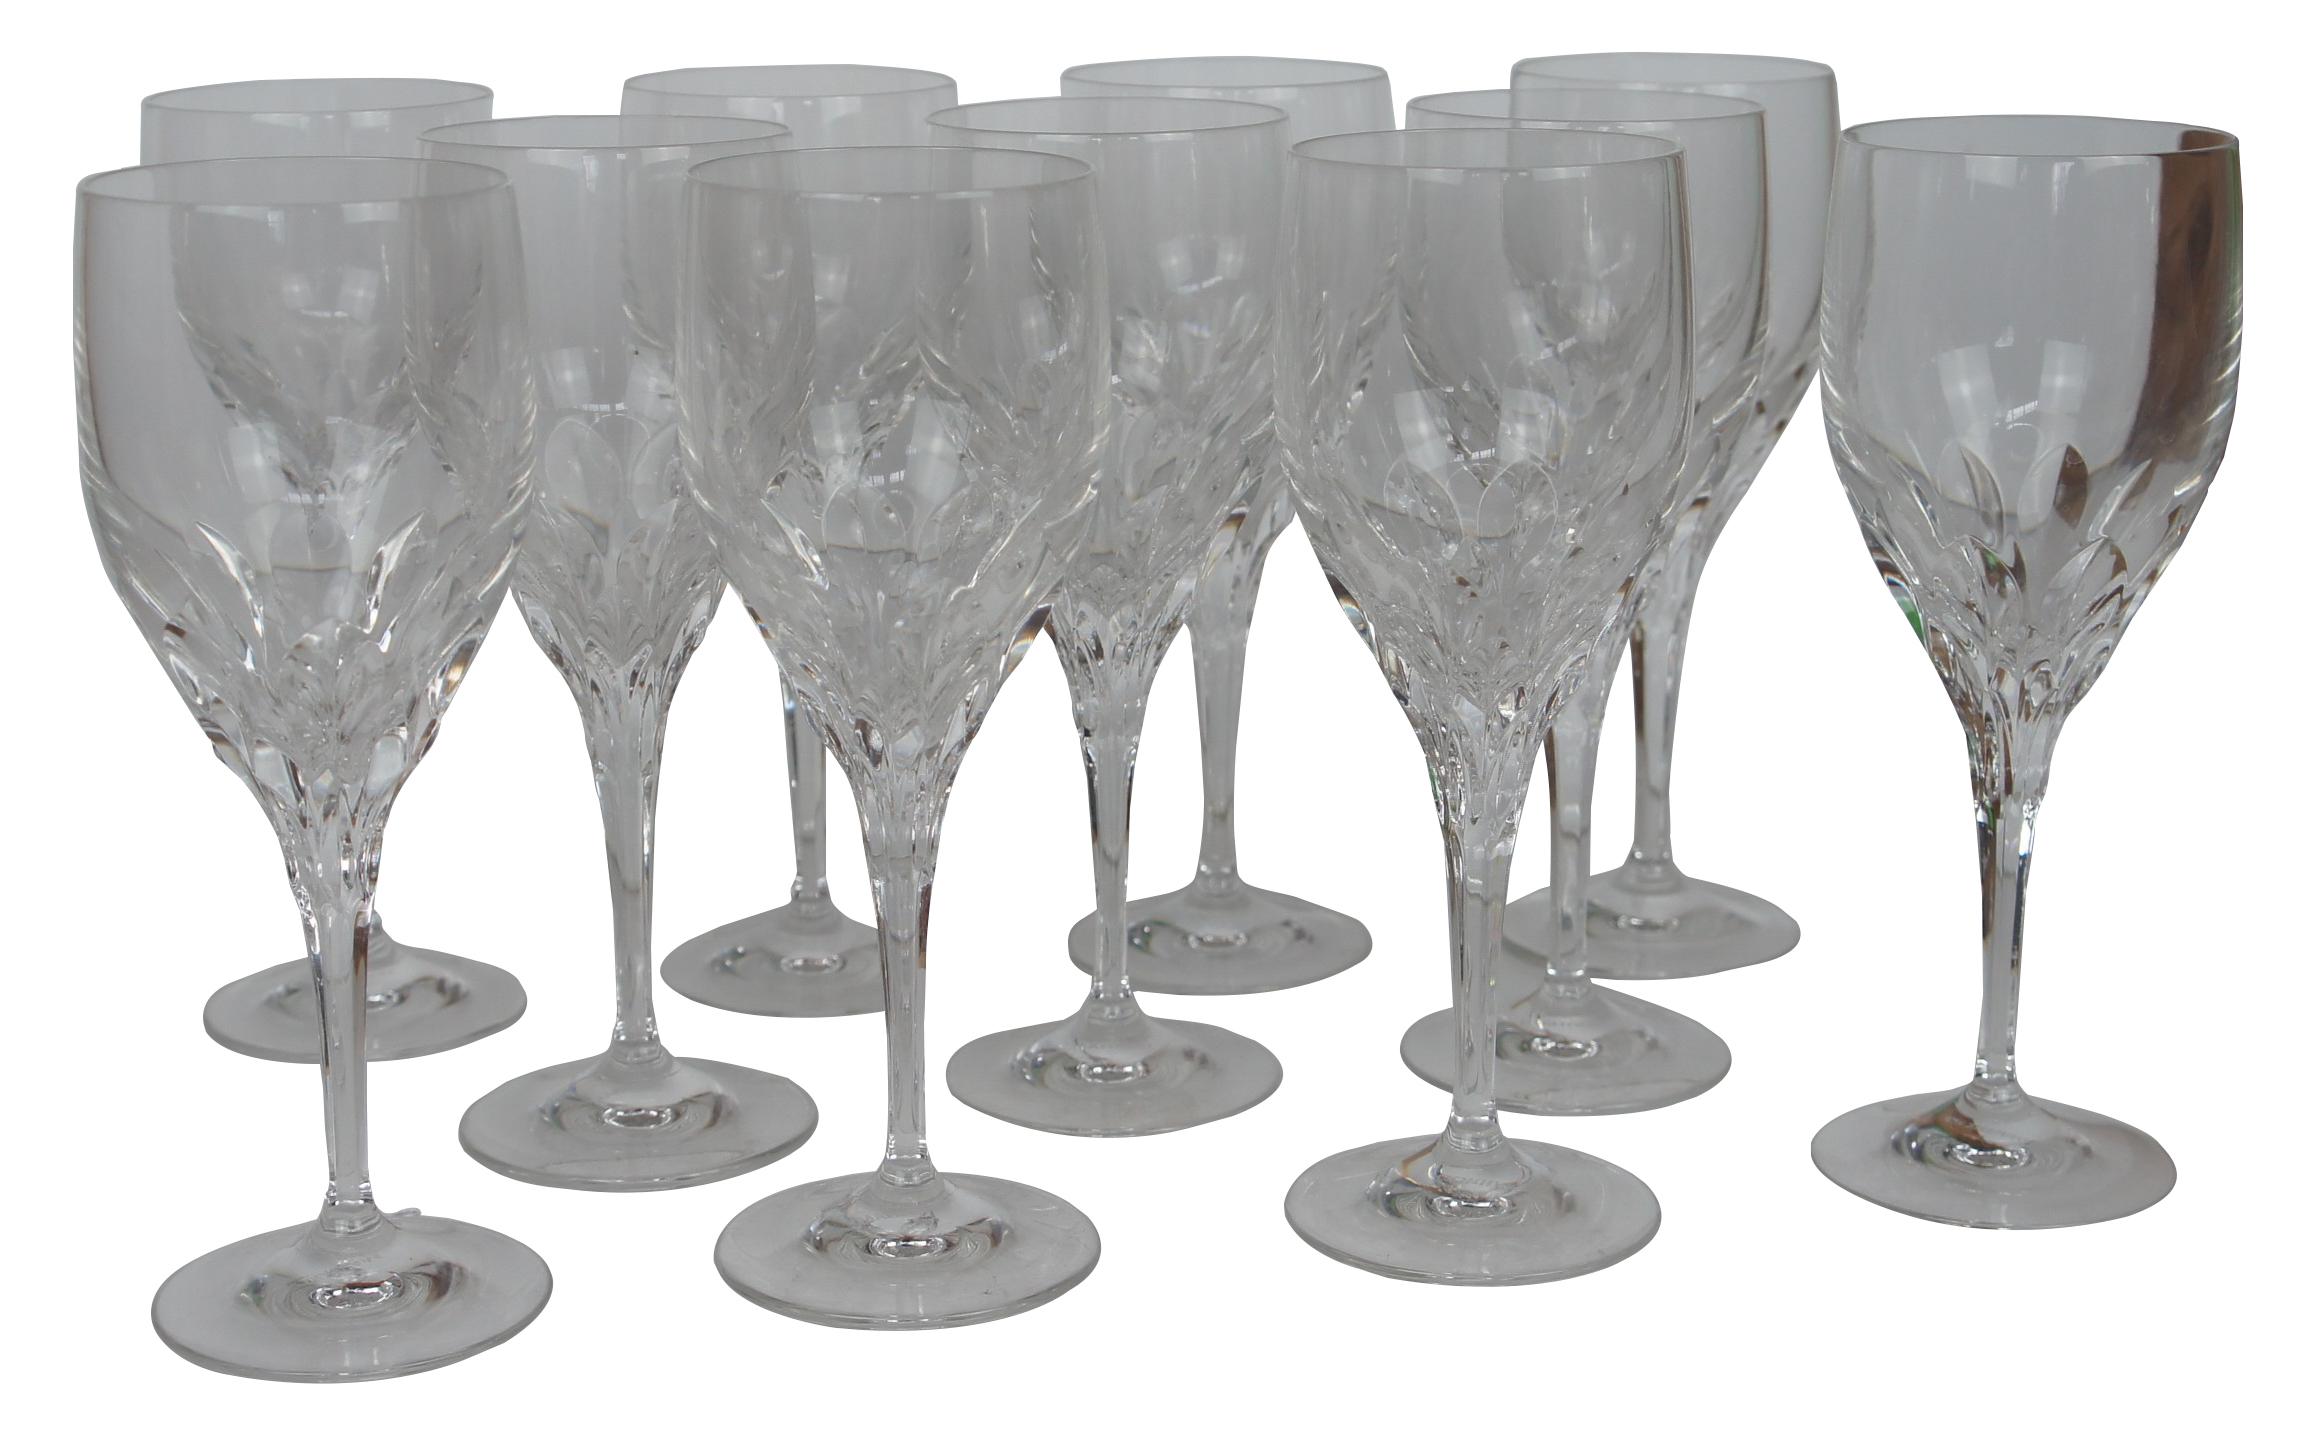 11 Gorham cut crystal diamond pattern goblets, perfect for water, wines or iced tea. Measures: 8